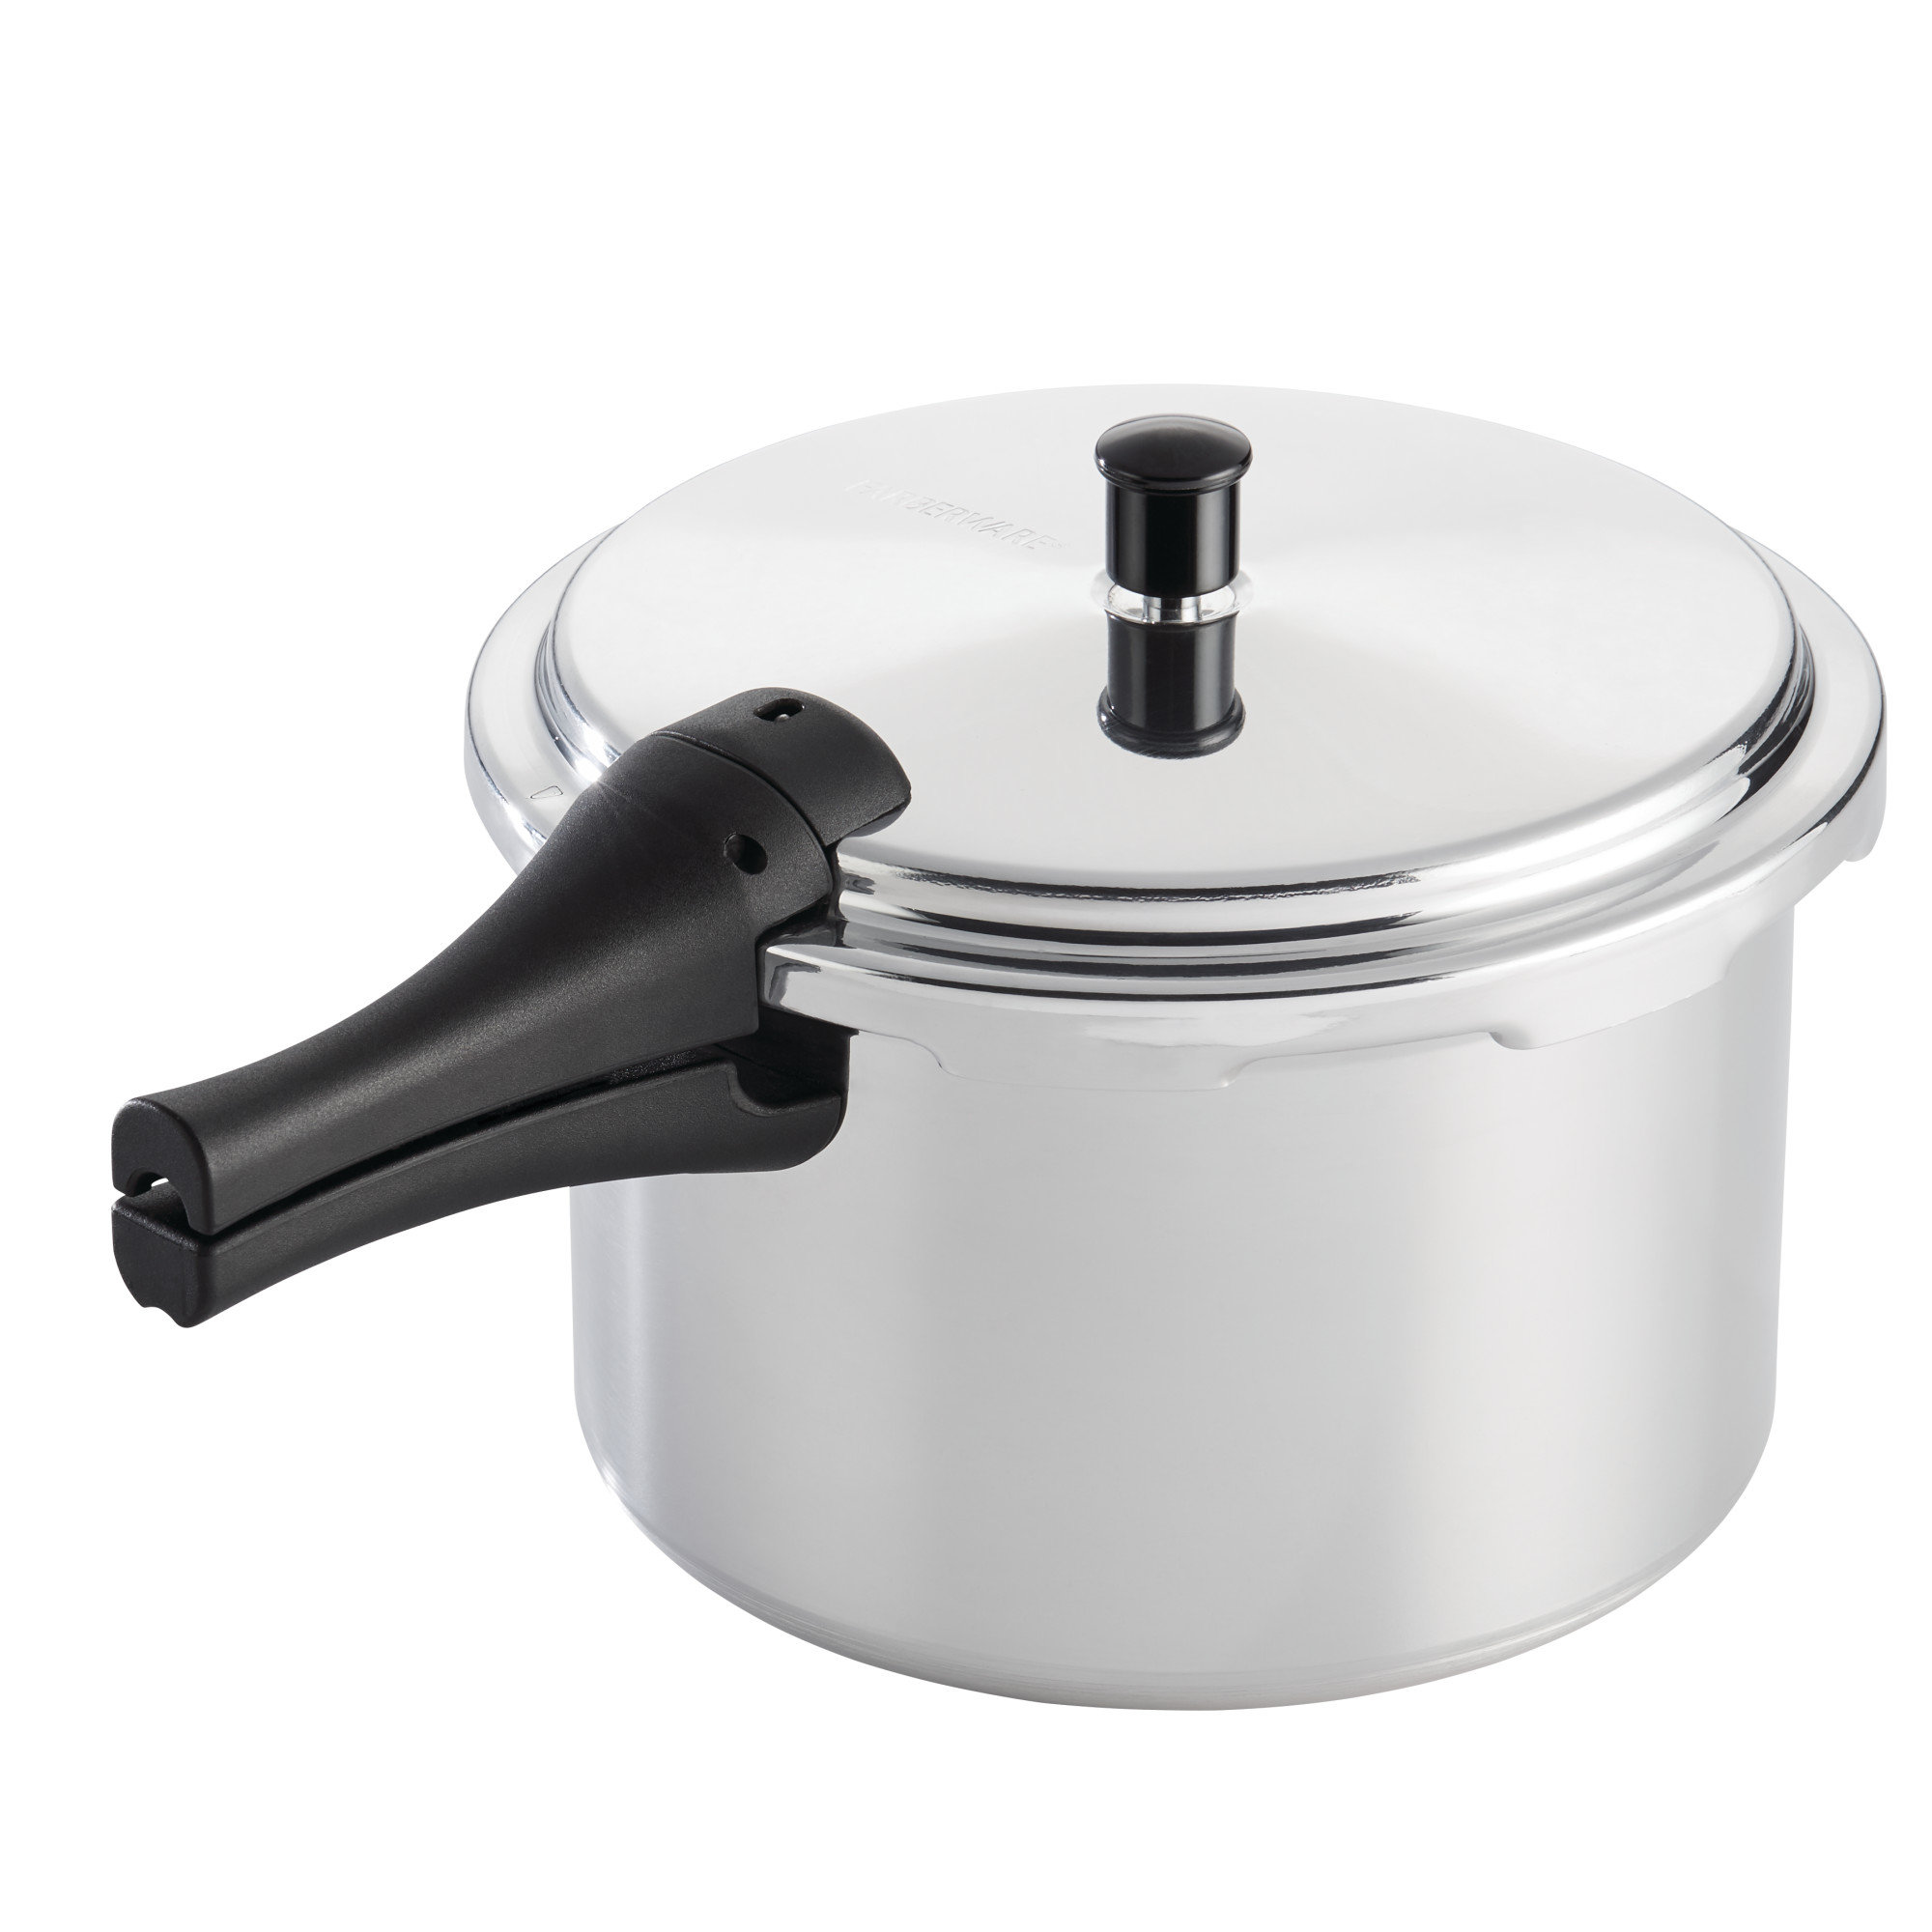 Farberware Stainless Steel Induction Stovetop Pressure Cooker, 8-Quart